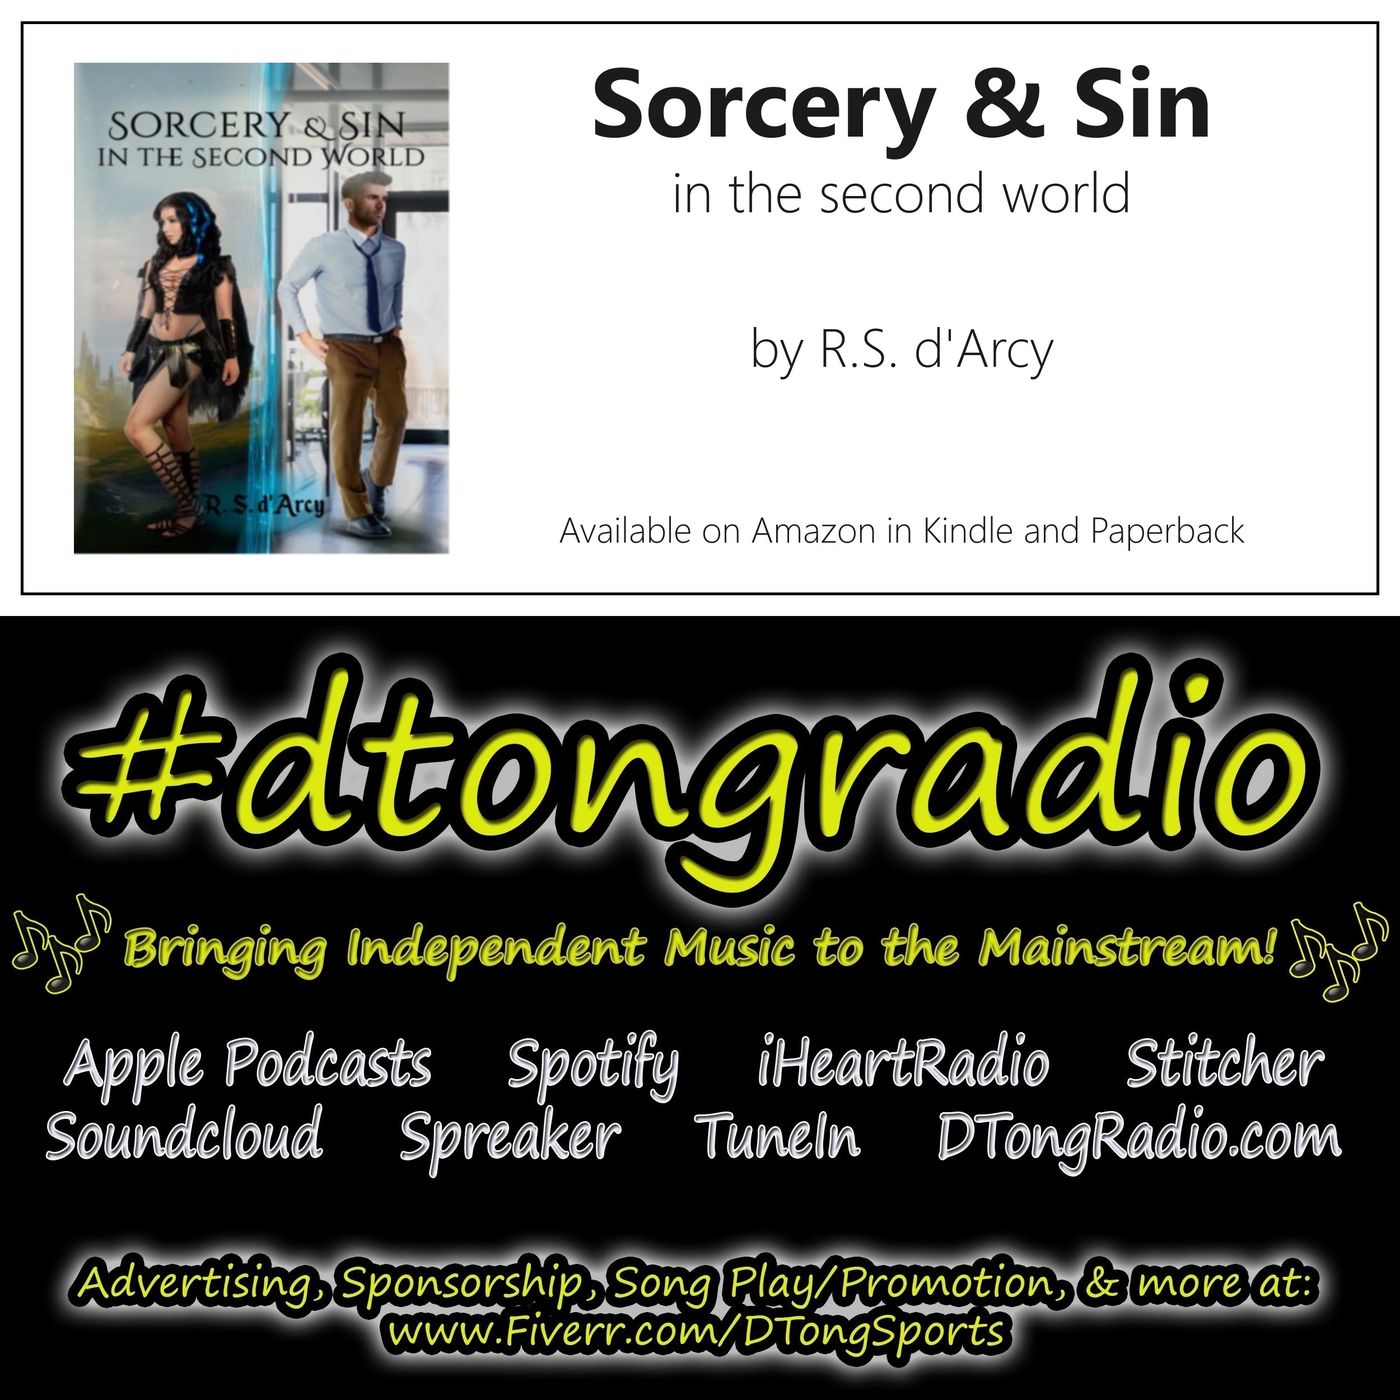 All Independent Music Showcase - Powered by Sorcery & Sin by R.S. d'Arcy